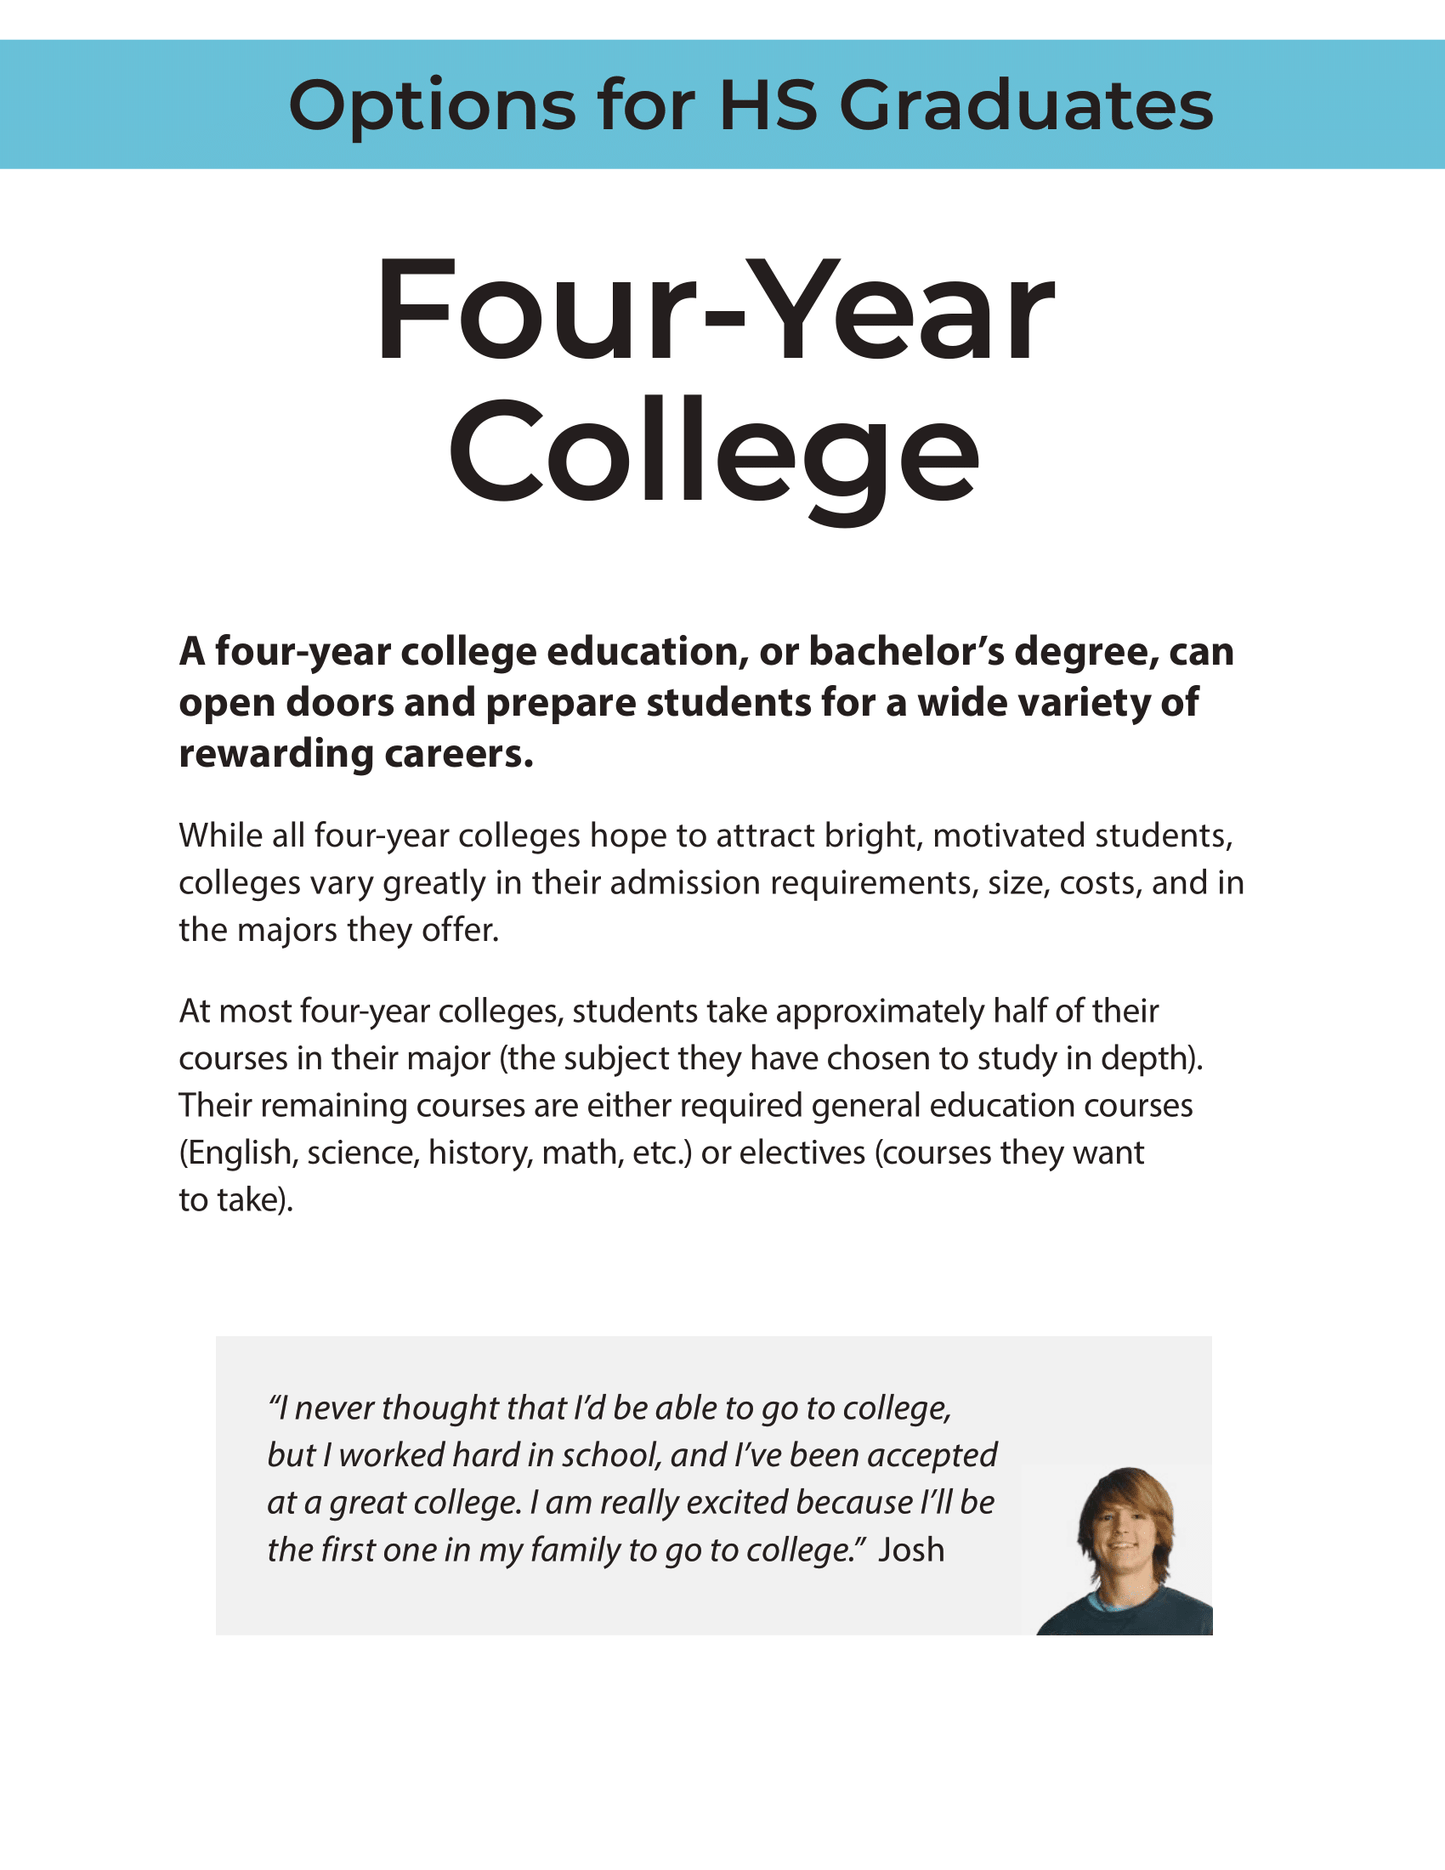 Options for HS Graduates - Four-Year College